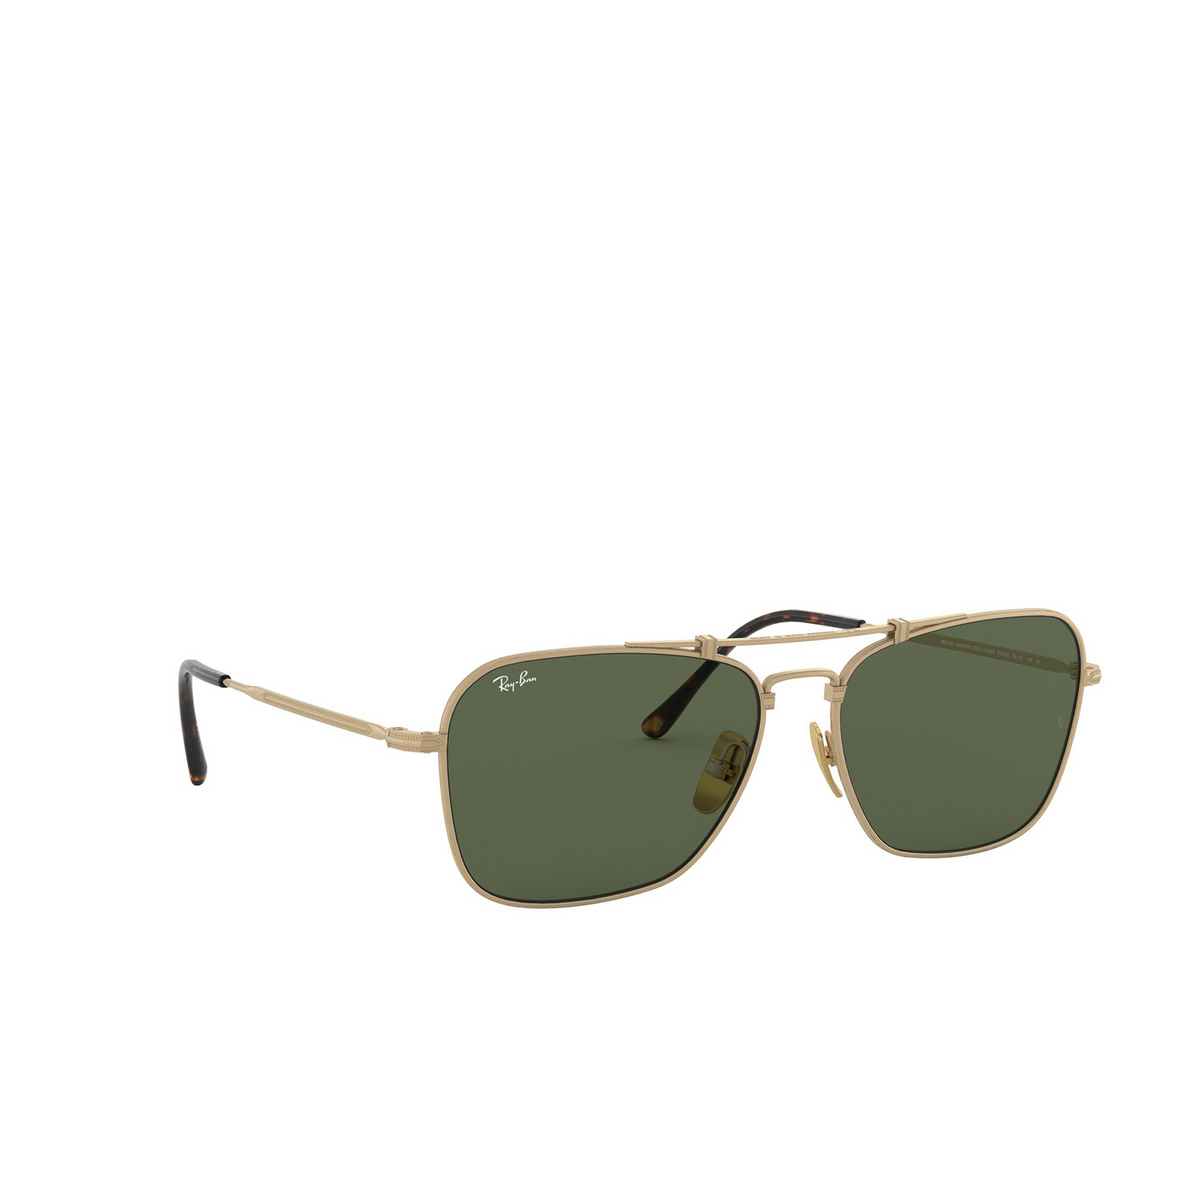 Ray-Ban® Square Sunglasses: Titanium RB8136 color Brushed Demi Gloss White Gold 913658 - three-quarters view.